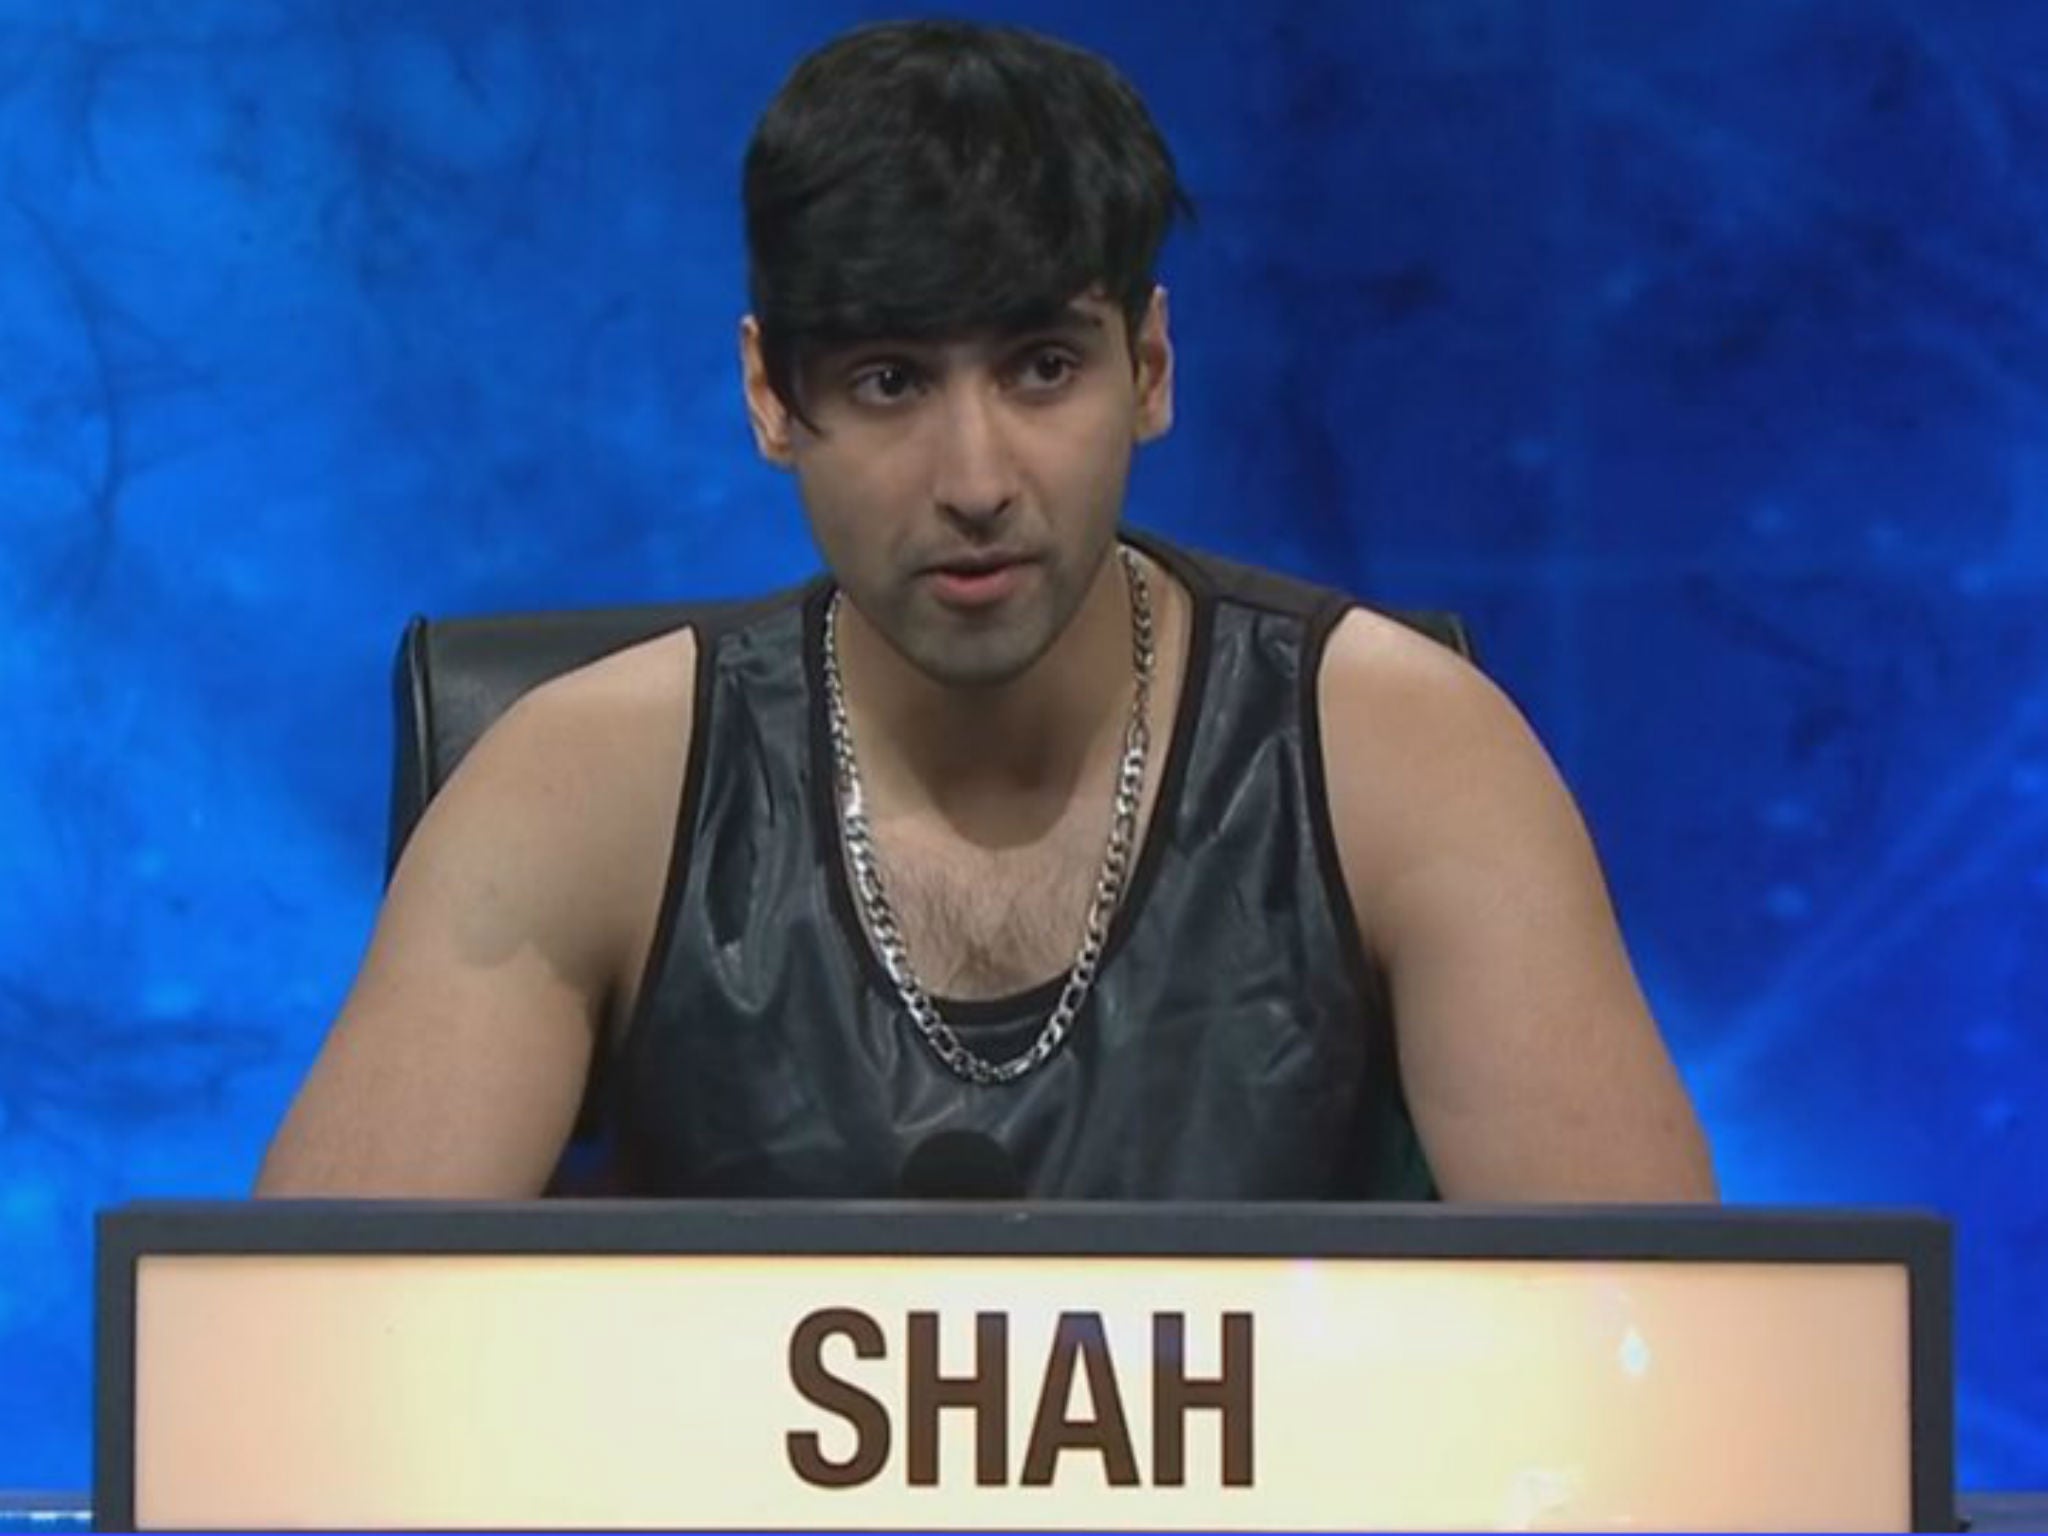 That leather vest and chain will go down in University Challenge history